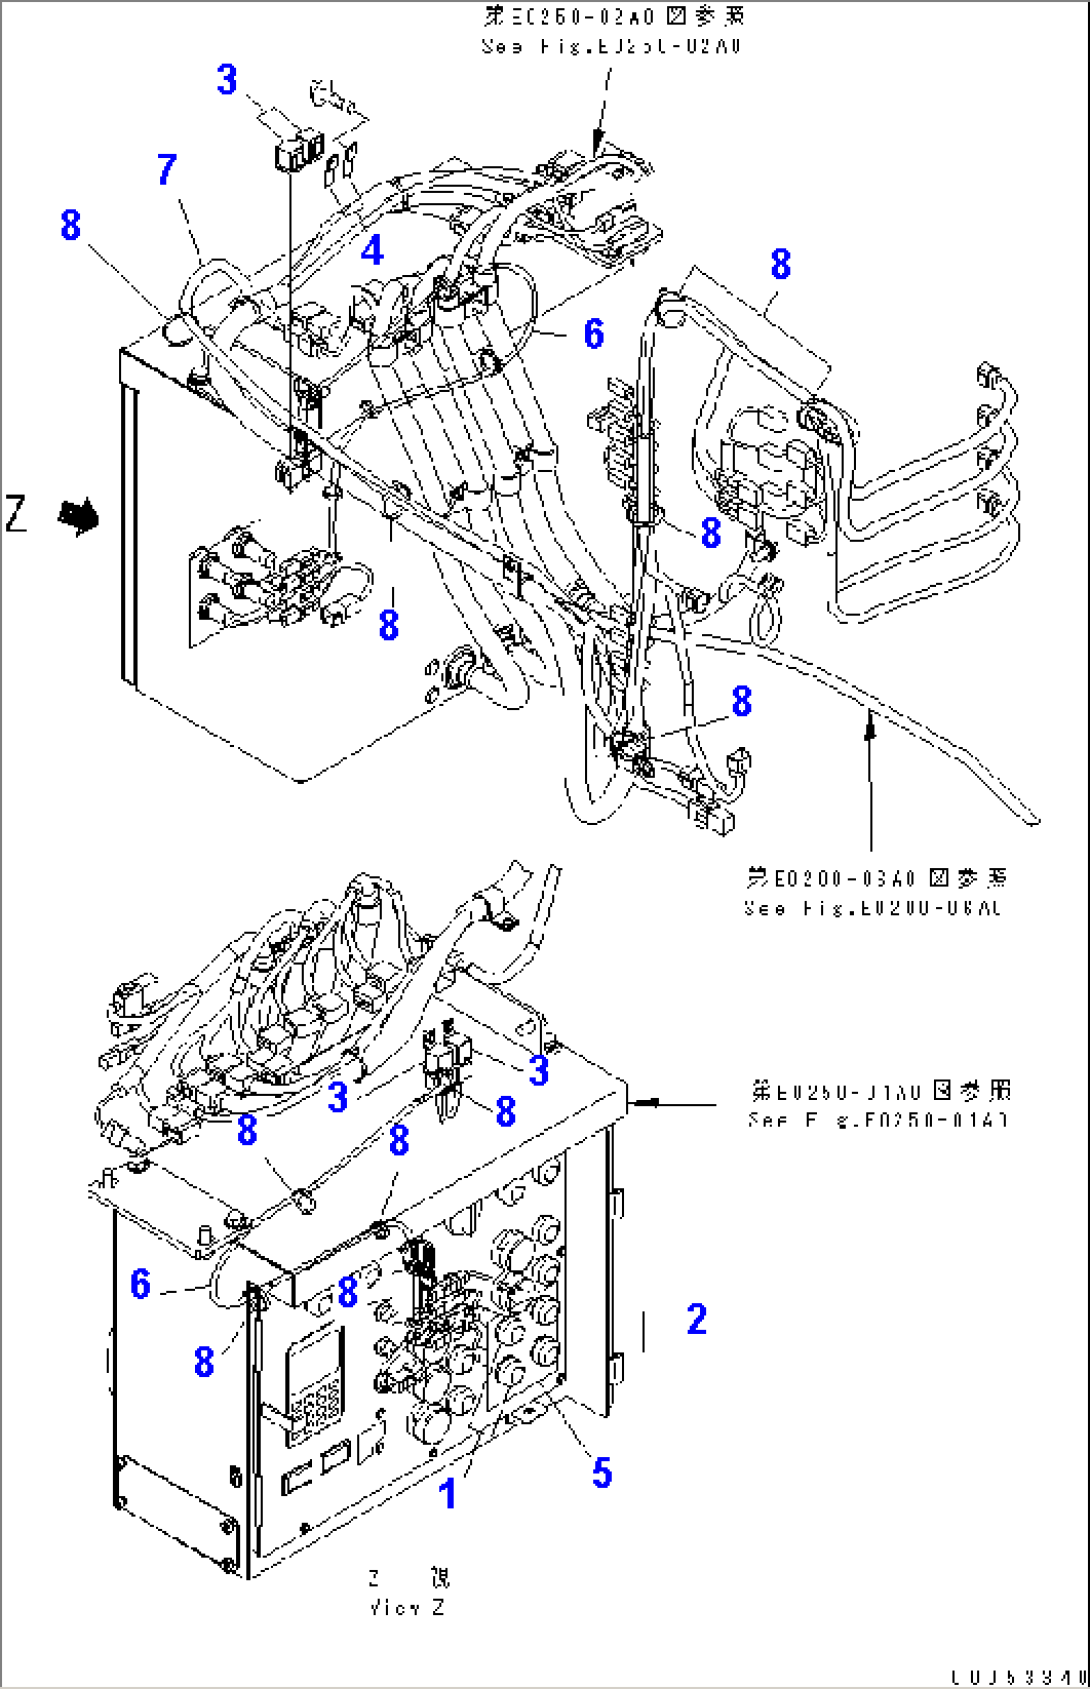 2-ATTACHIMENT WIRING (1/2) (WITH 2ND. BELT CONVEYOR AND VIBRATION SIEVE)(#2001-)